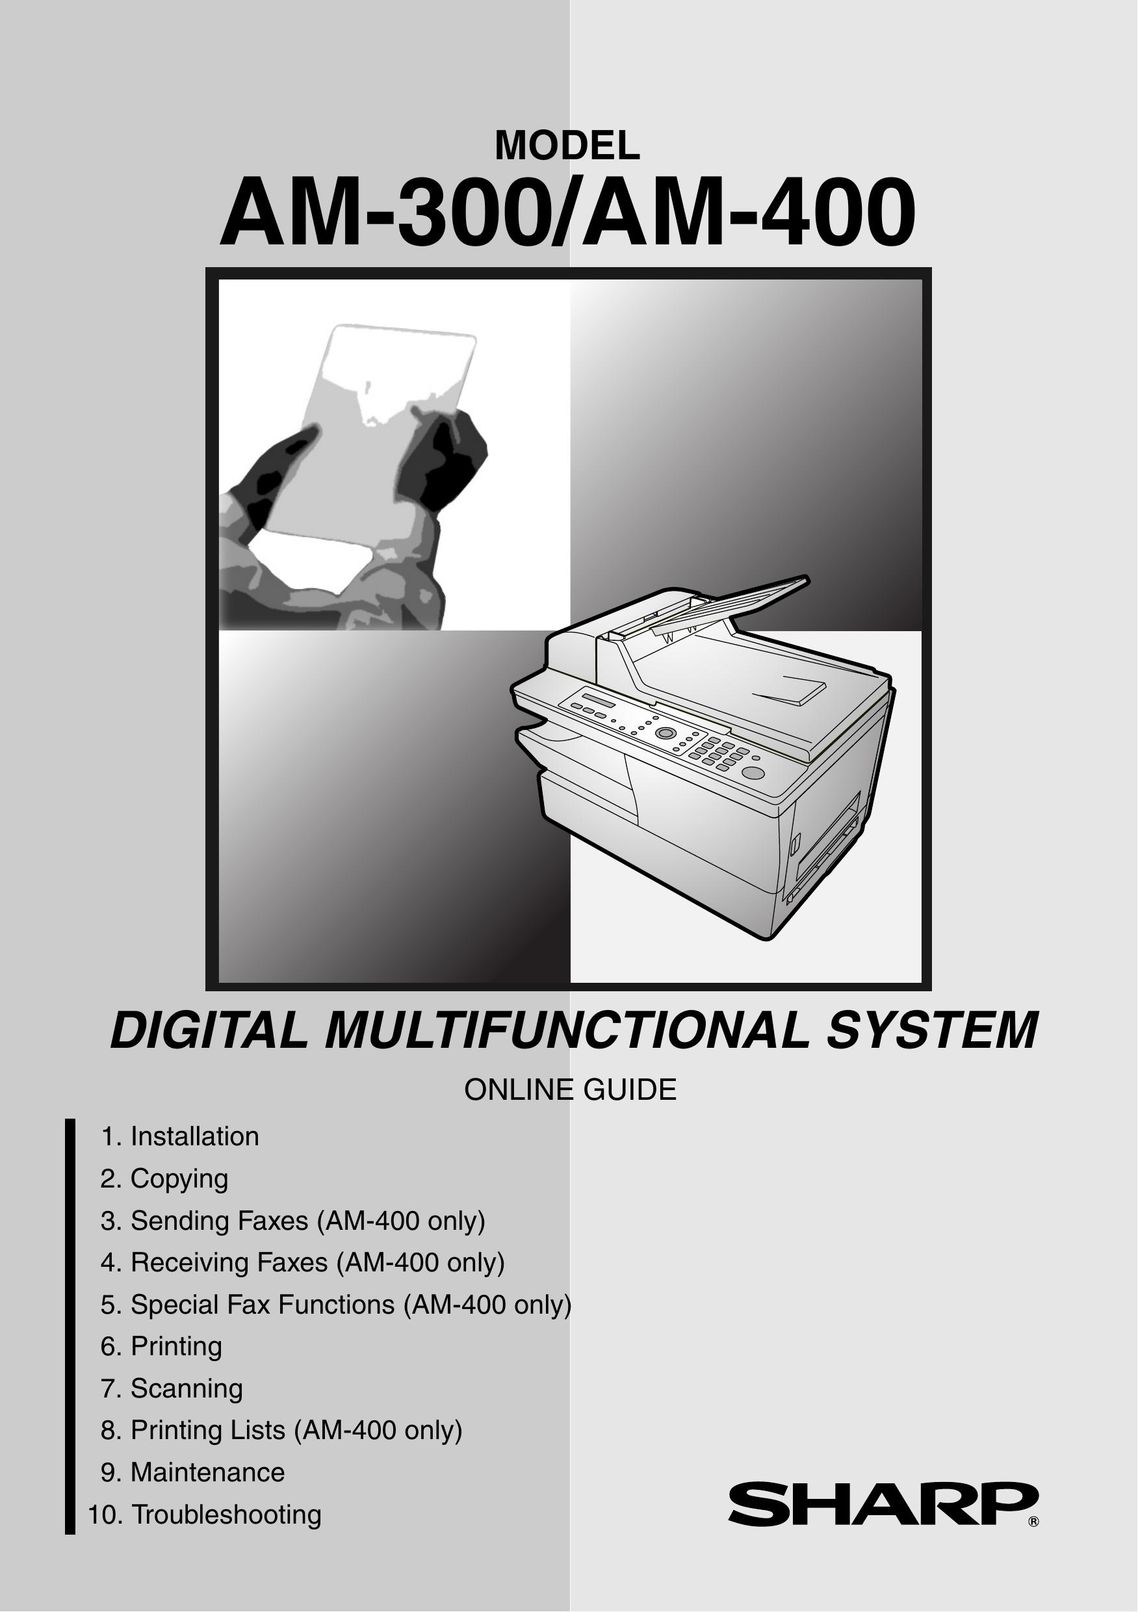 Sharp AM-400 All in One Printer User Manual